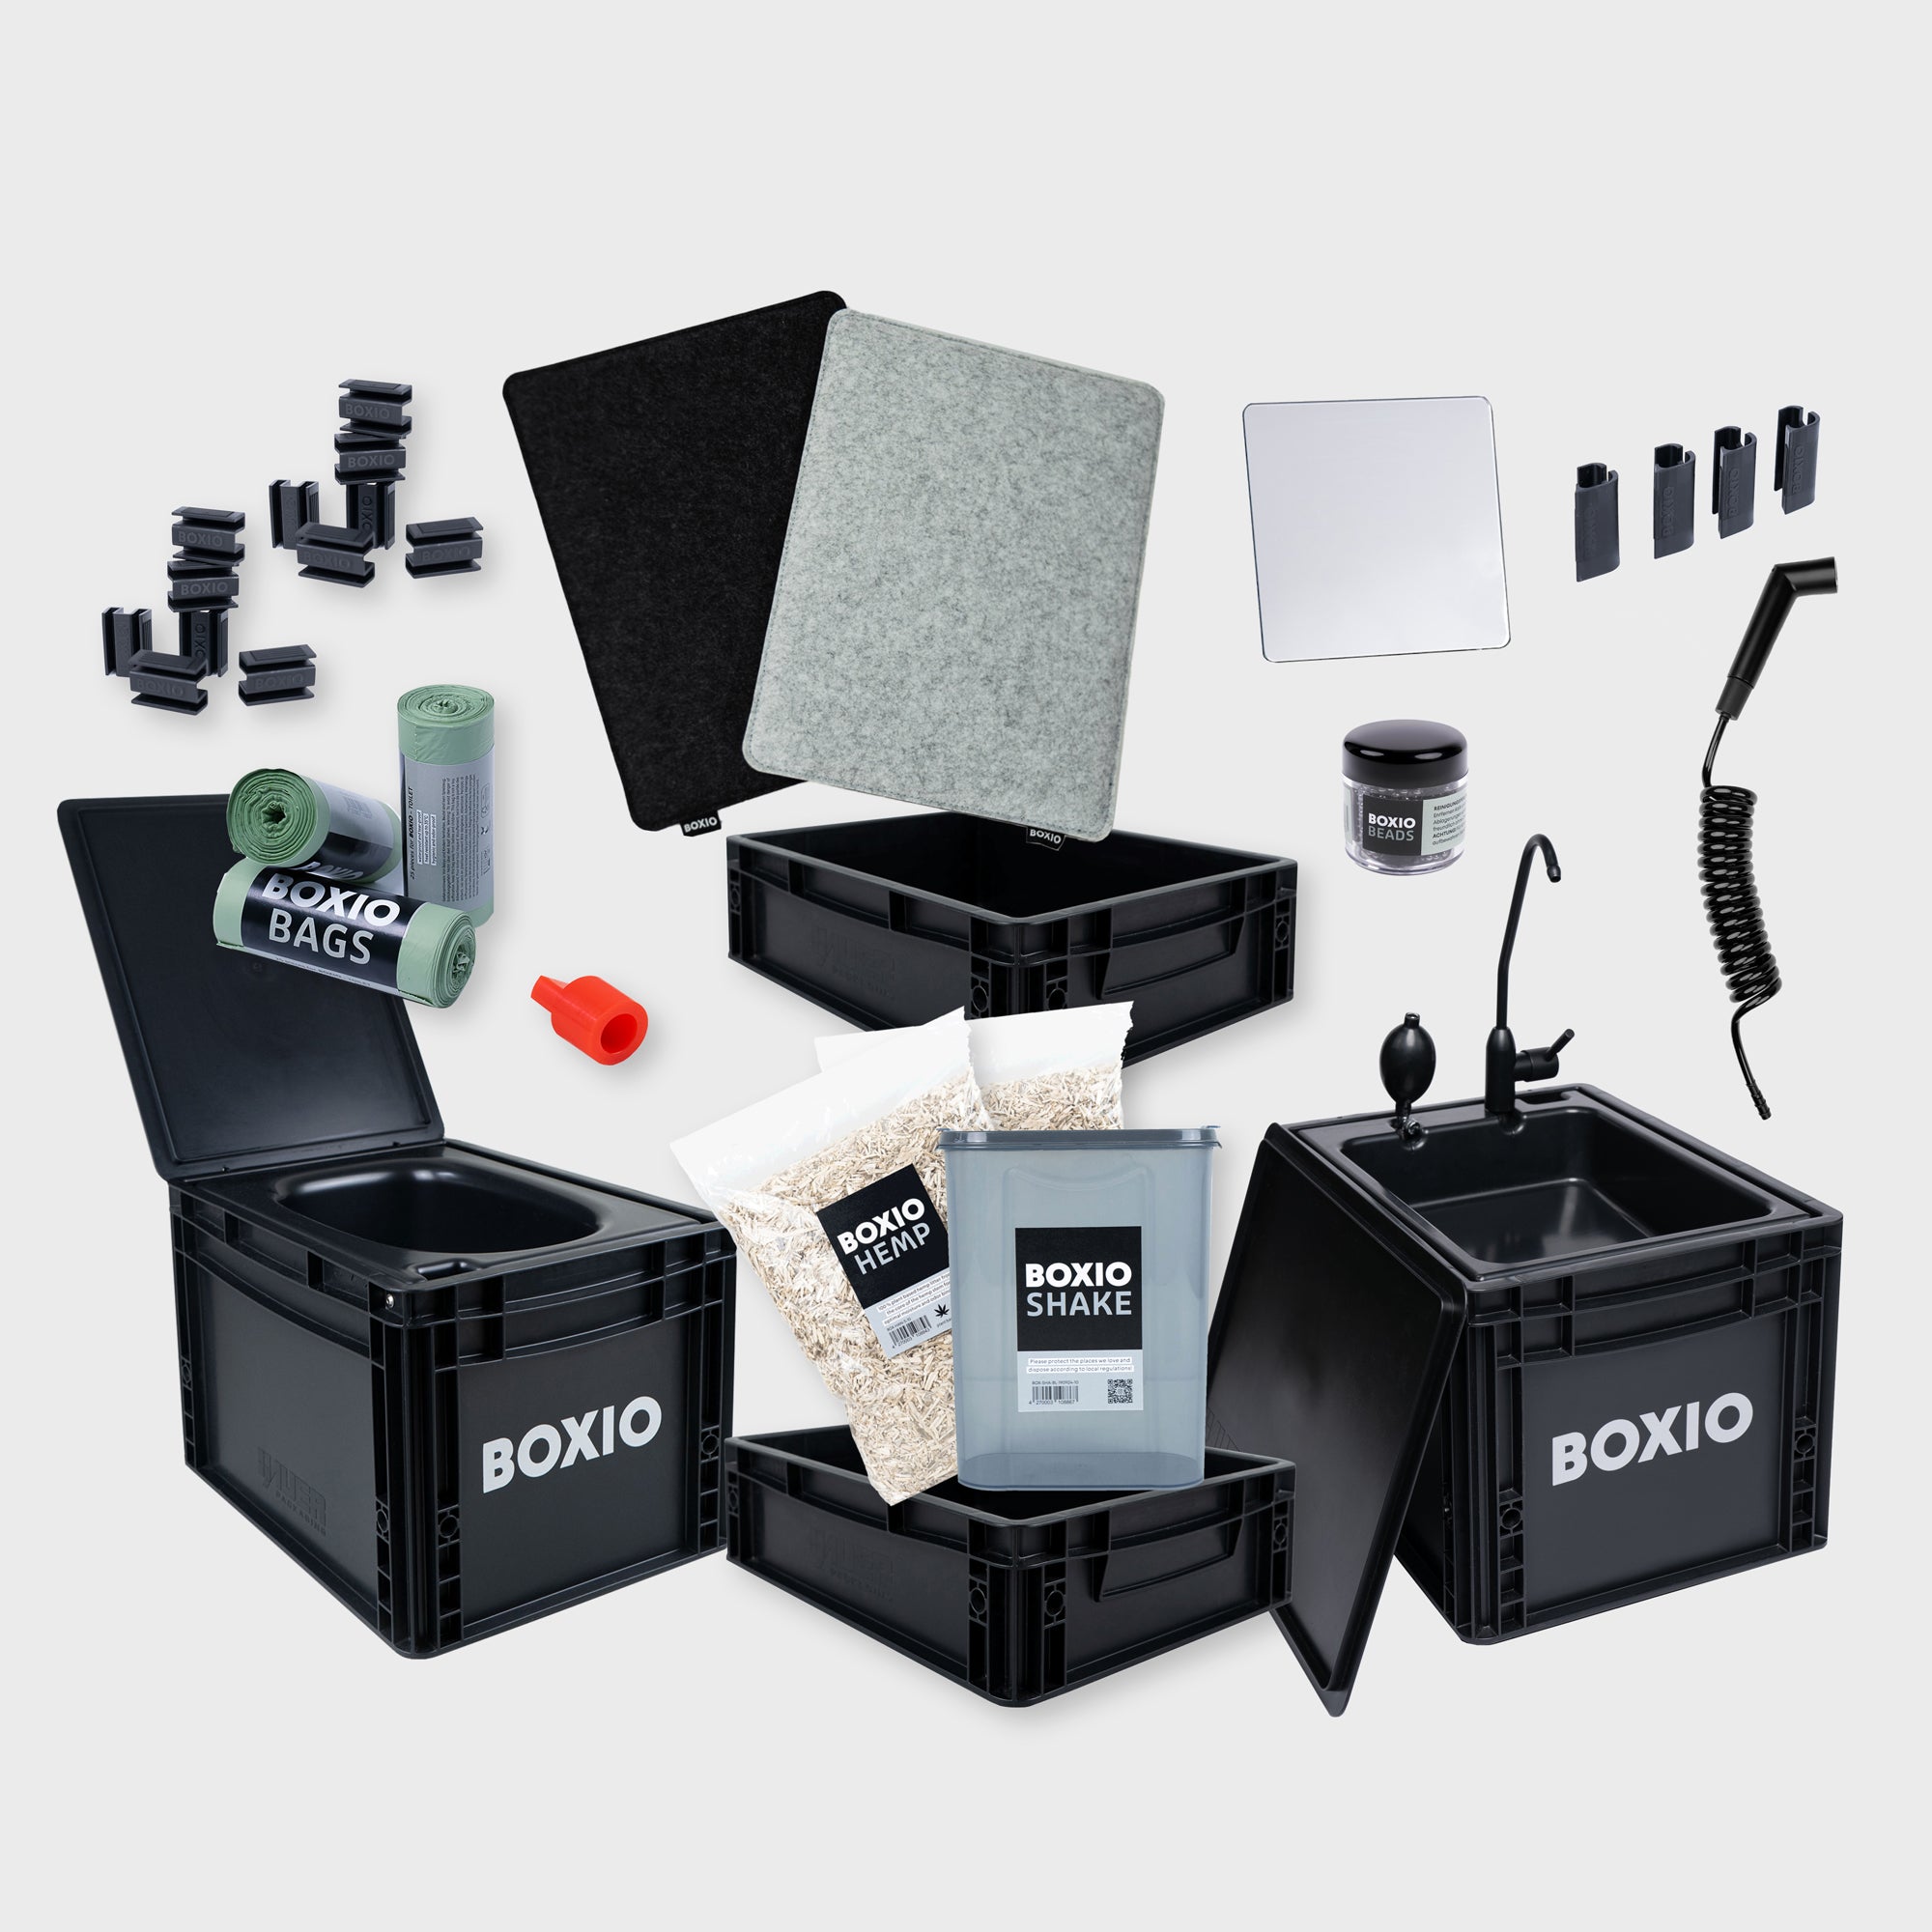 BOXIO - SANITARY: Complete set with urine-diverting toilet, mobile washbasin and accessories